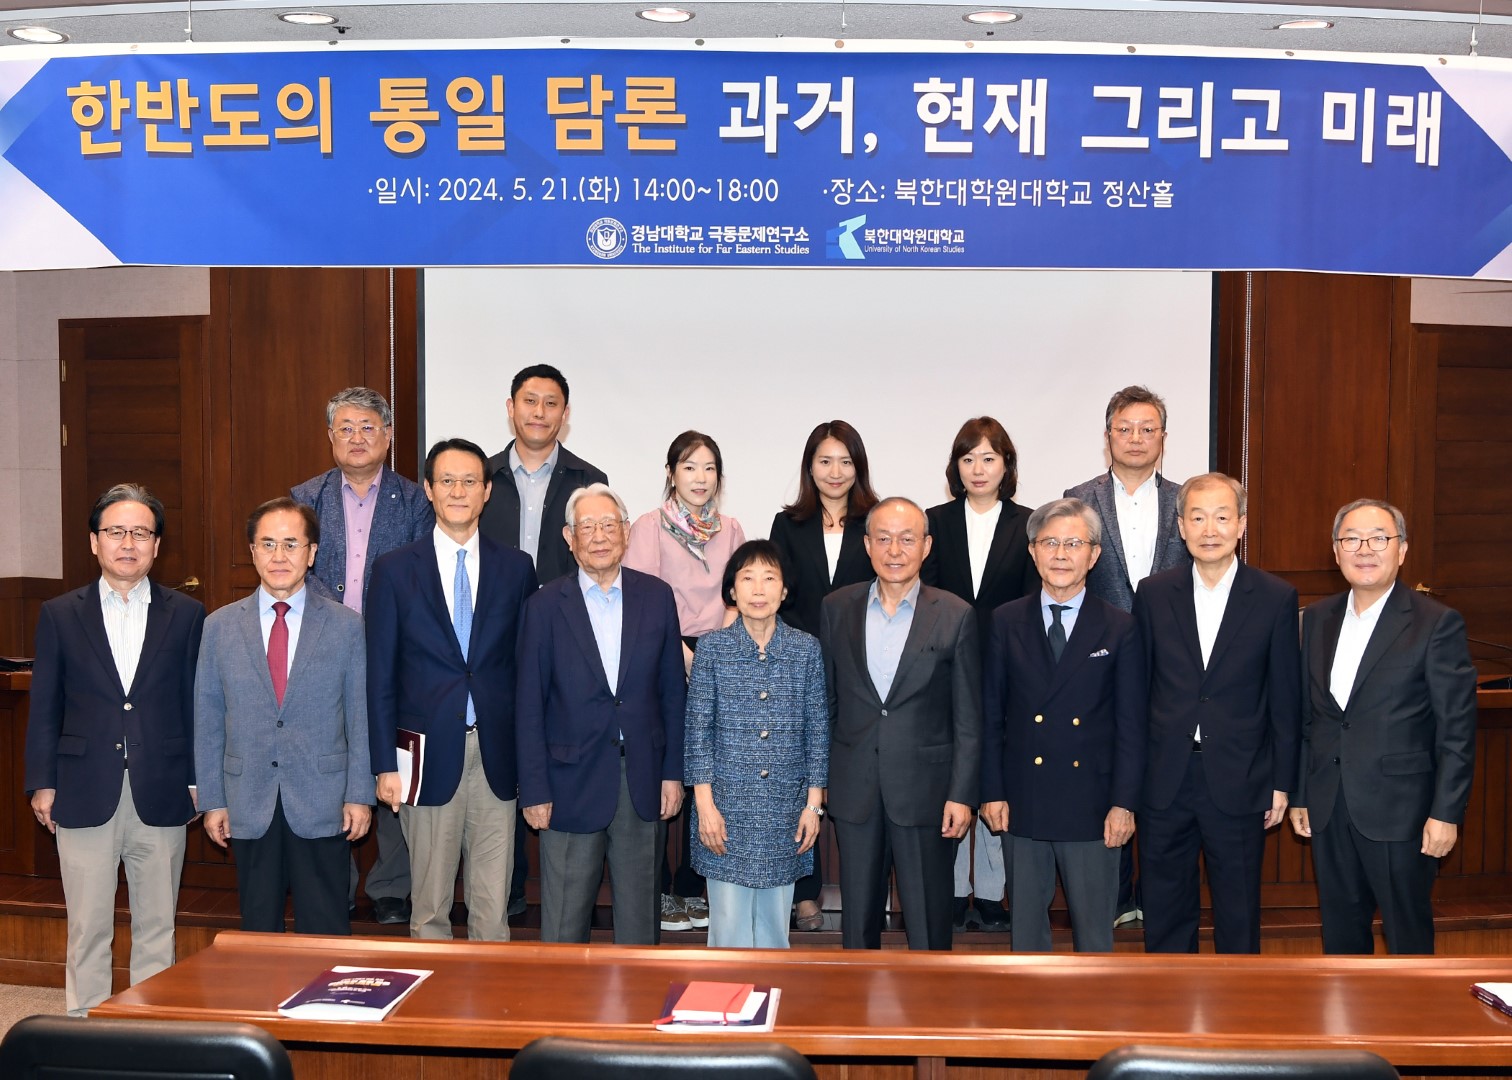 IFES-UNKS Conference on ‘Discourses of Unification on the Korean Peninsula’ 대표이미지